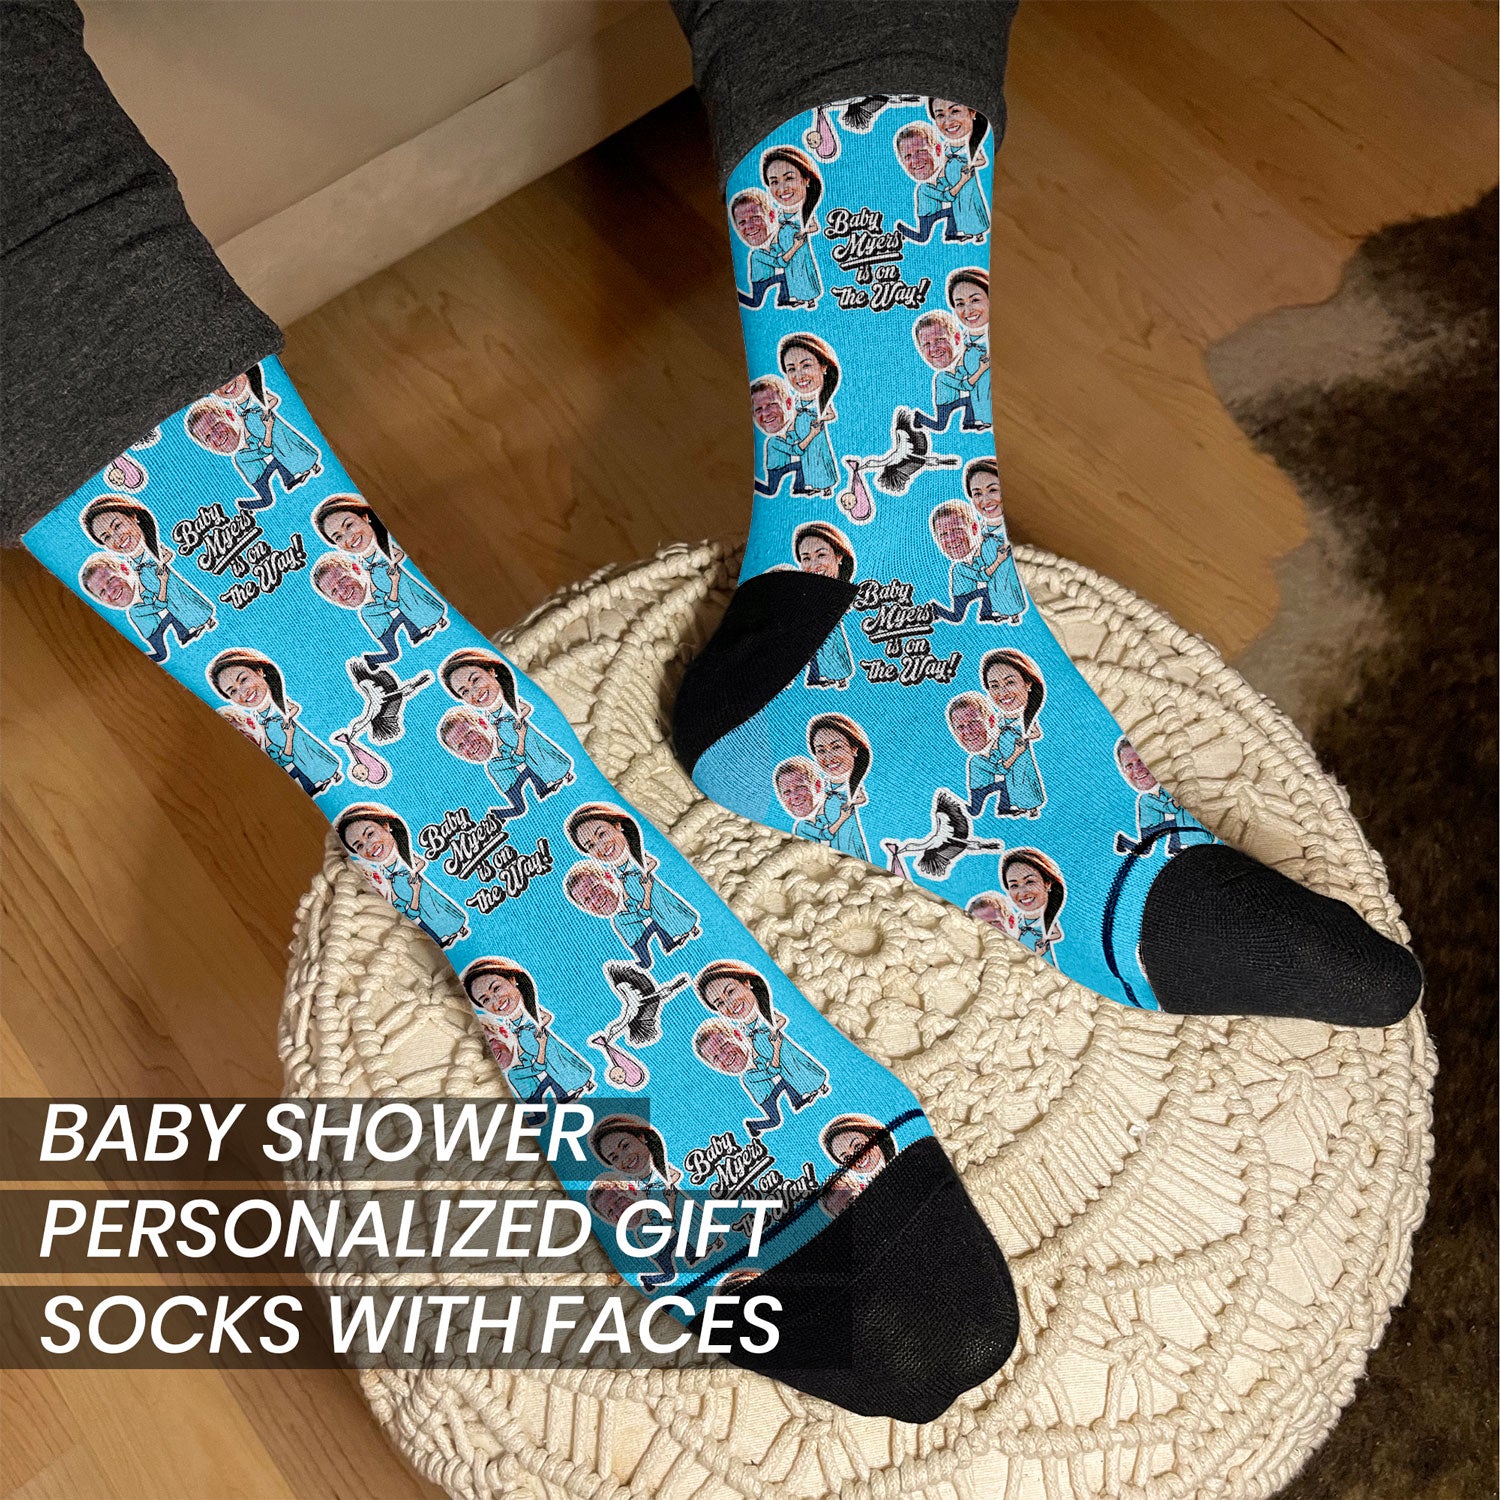 baby shower gifts personalized socks with faces of new parents on cartoon bodies